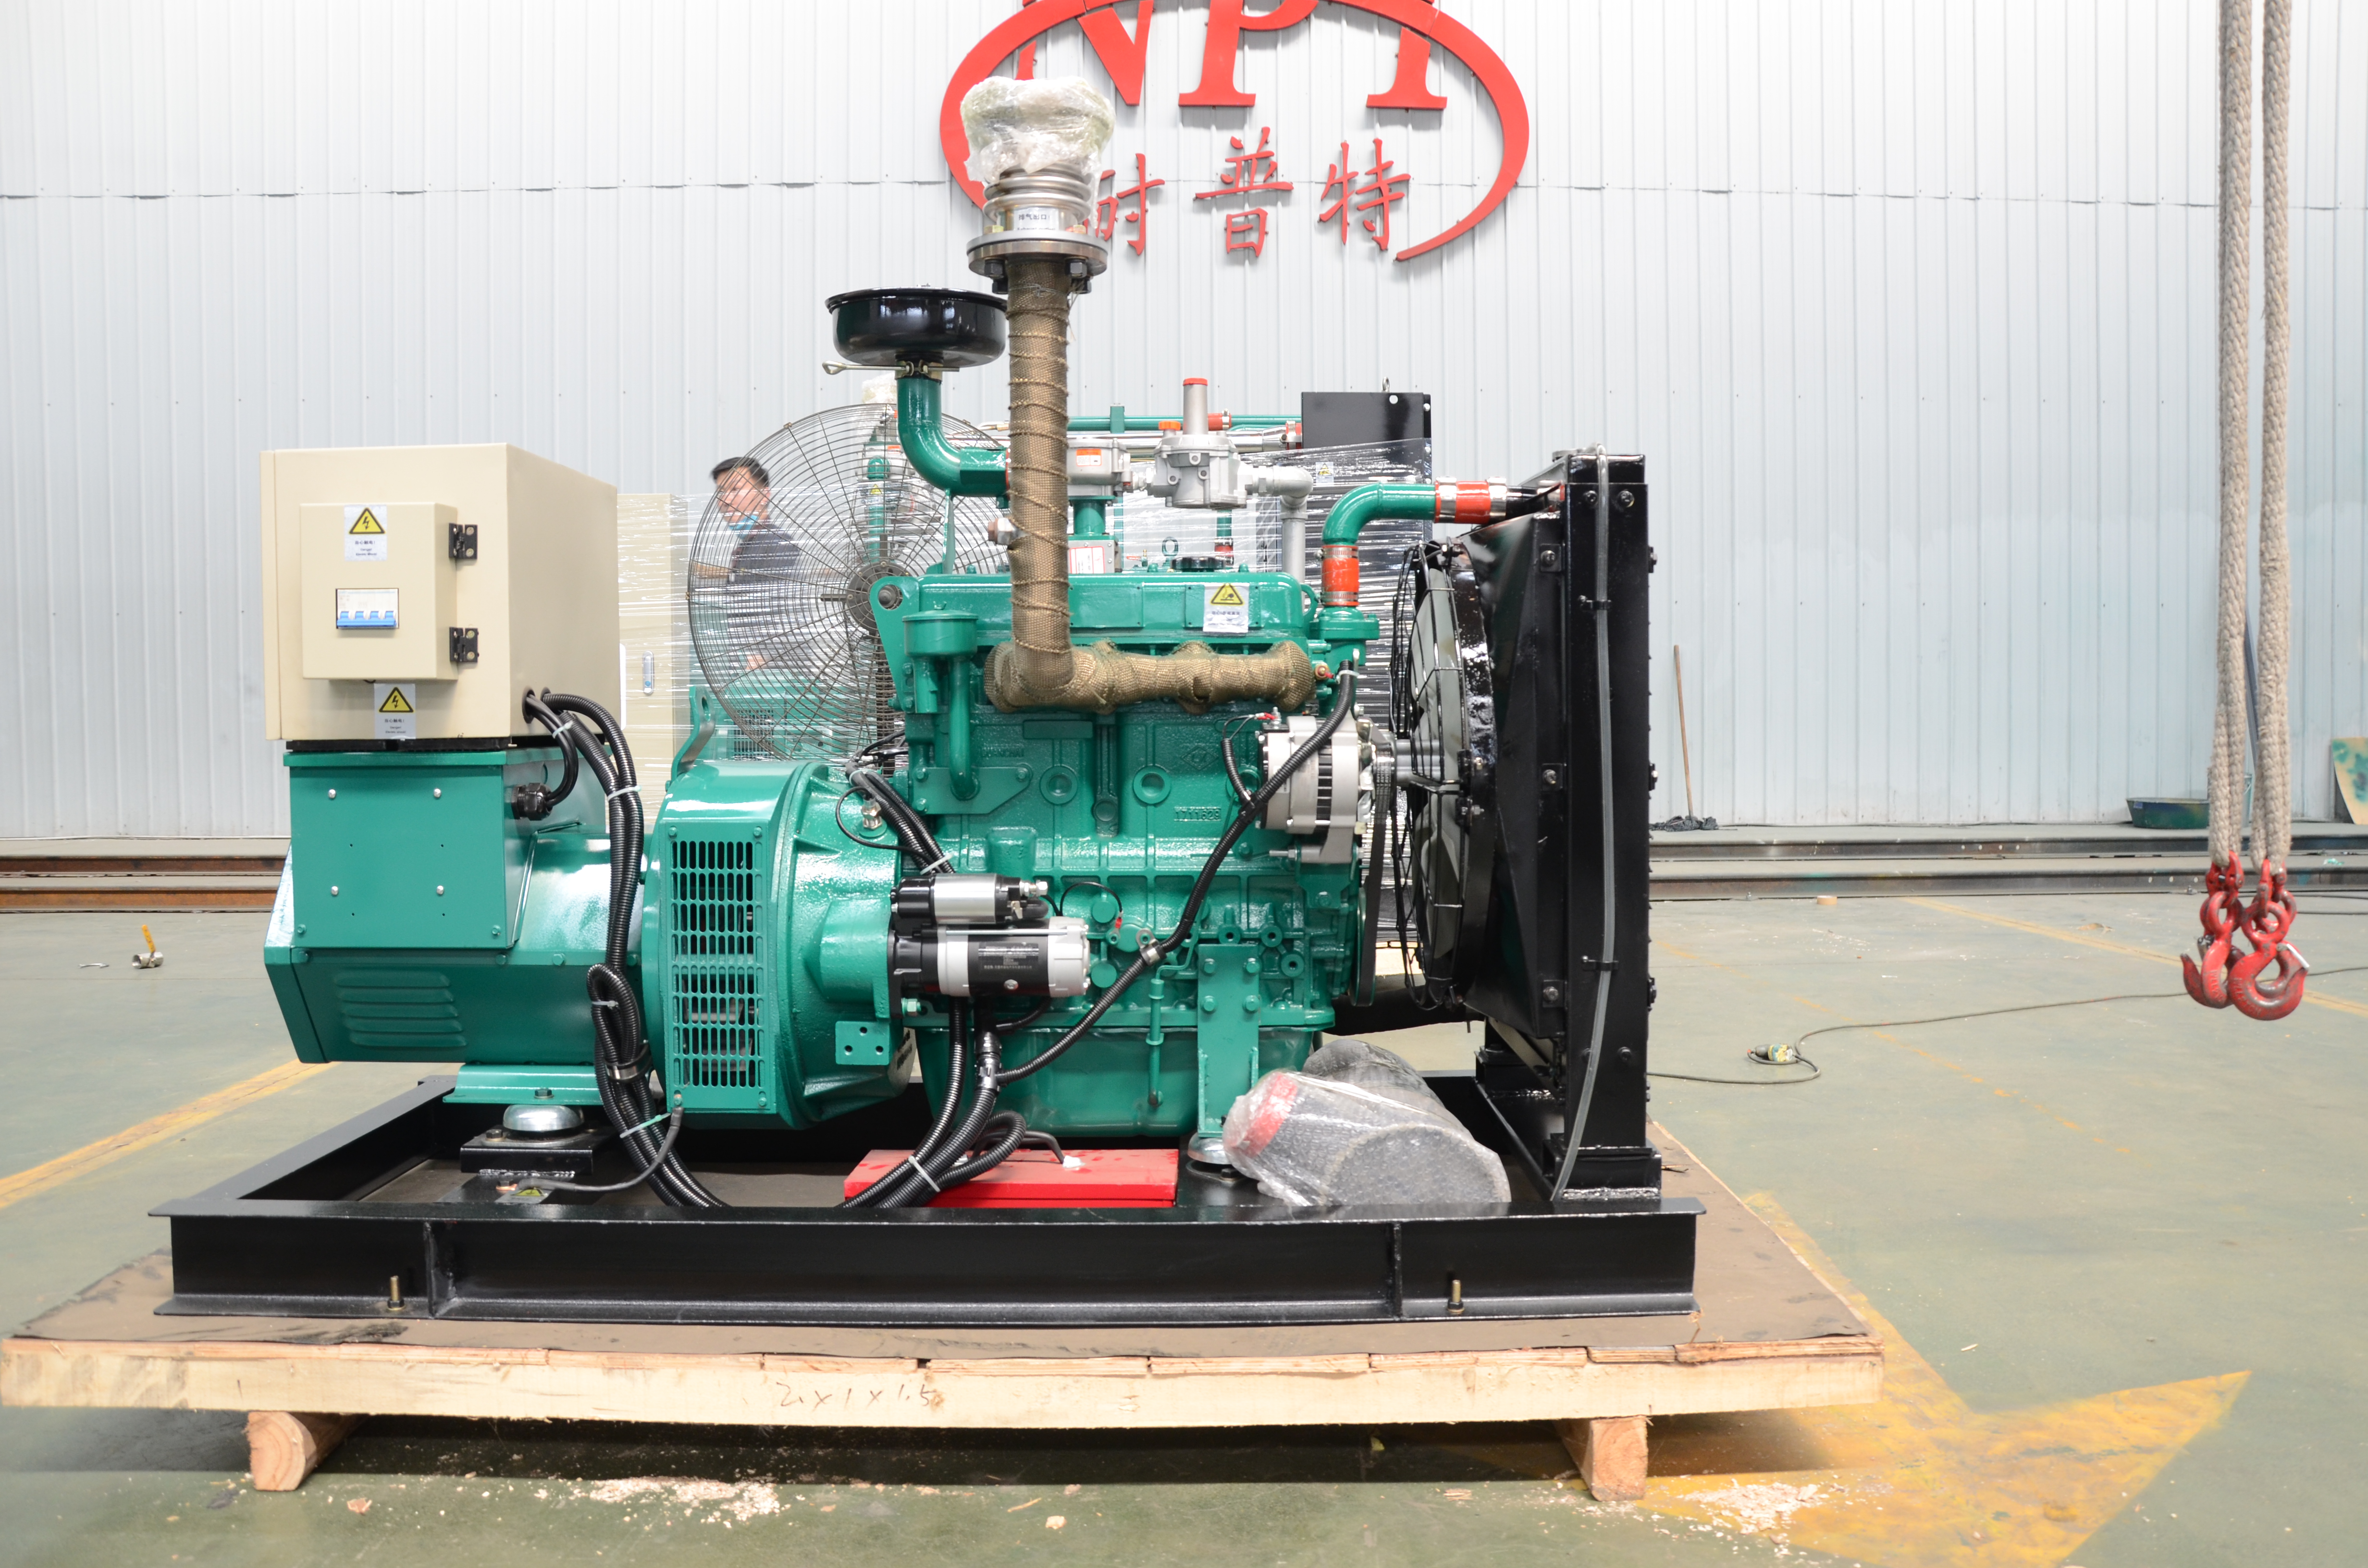 Causes and hazards of cylinder failure of natural gas generator set